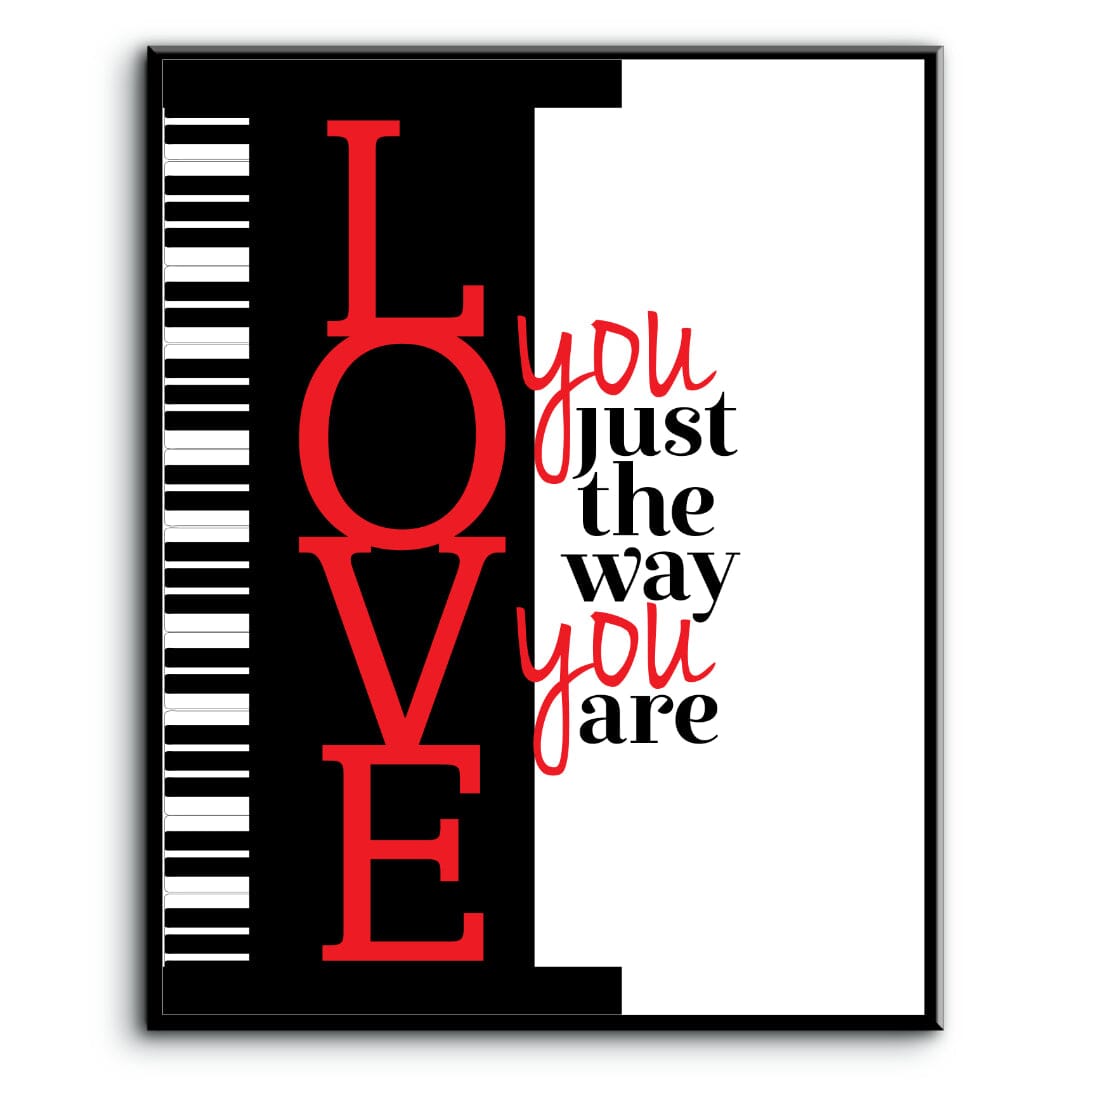 I Love You Just the Way You Are by Billy Joel - Lyrics Art Song Lyrics Art Song Lyrics Art 8x10 Plaque Mount 